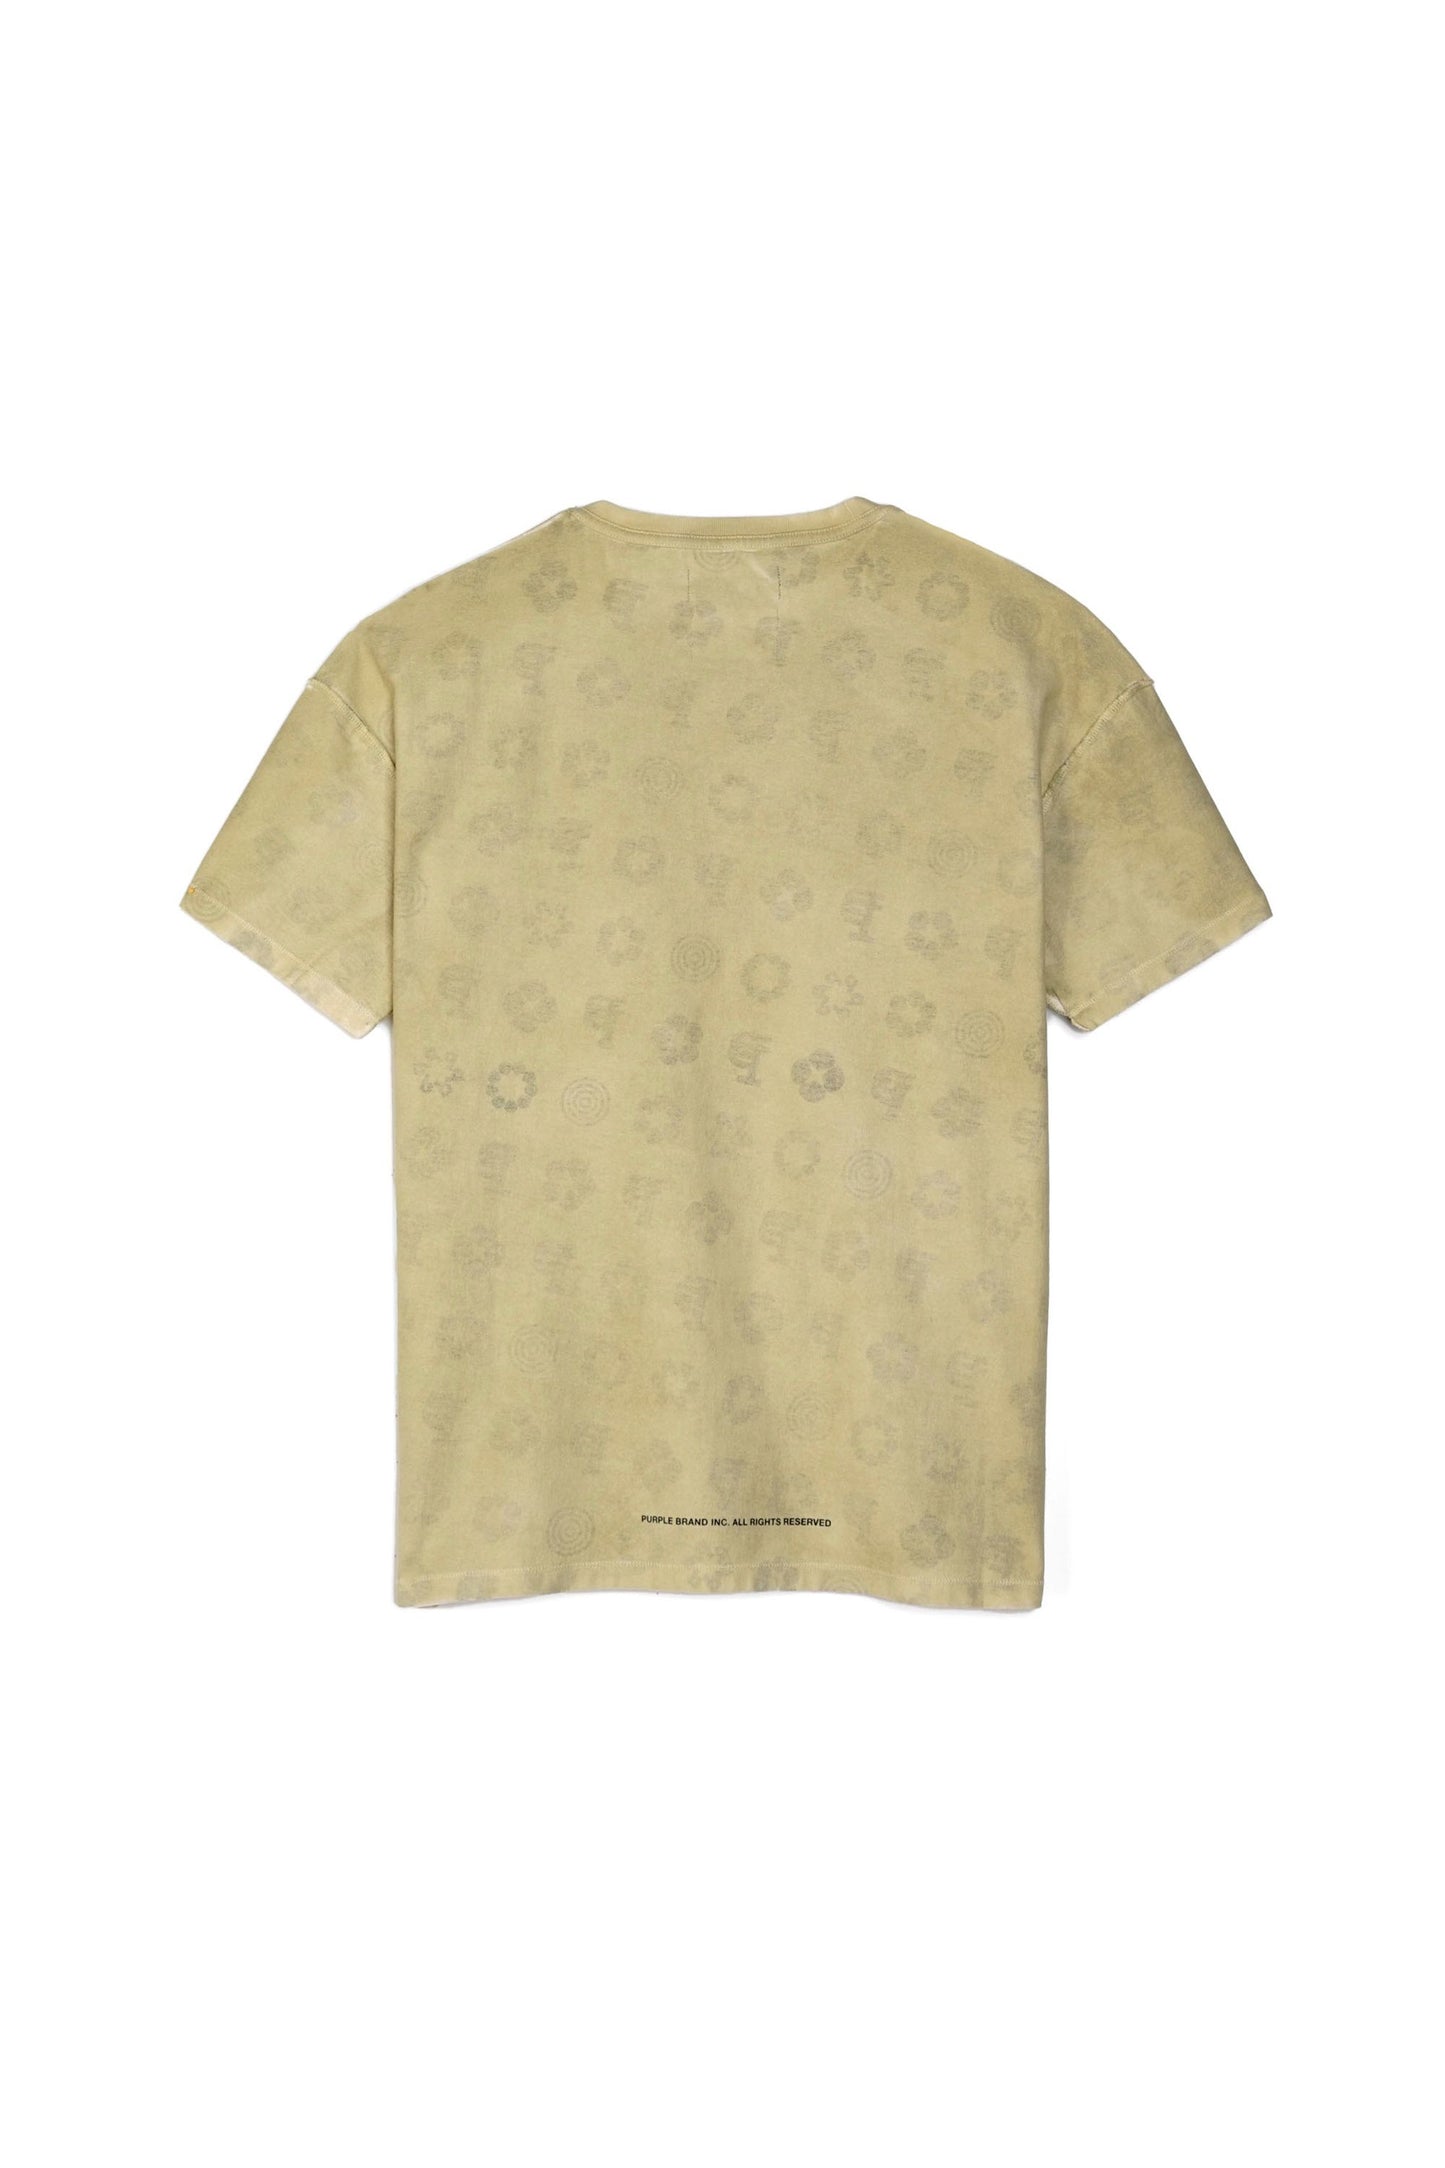 P101 RELAXED FIT TEE - MOSS SPRAY WITH INNER MONOGRAM PRINT